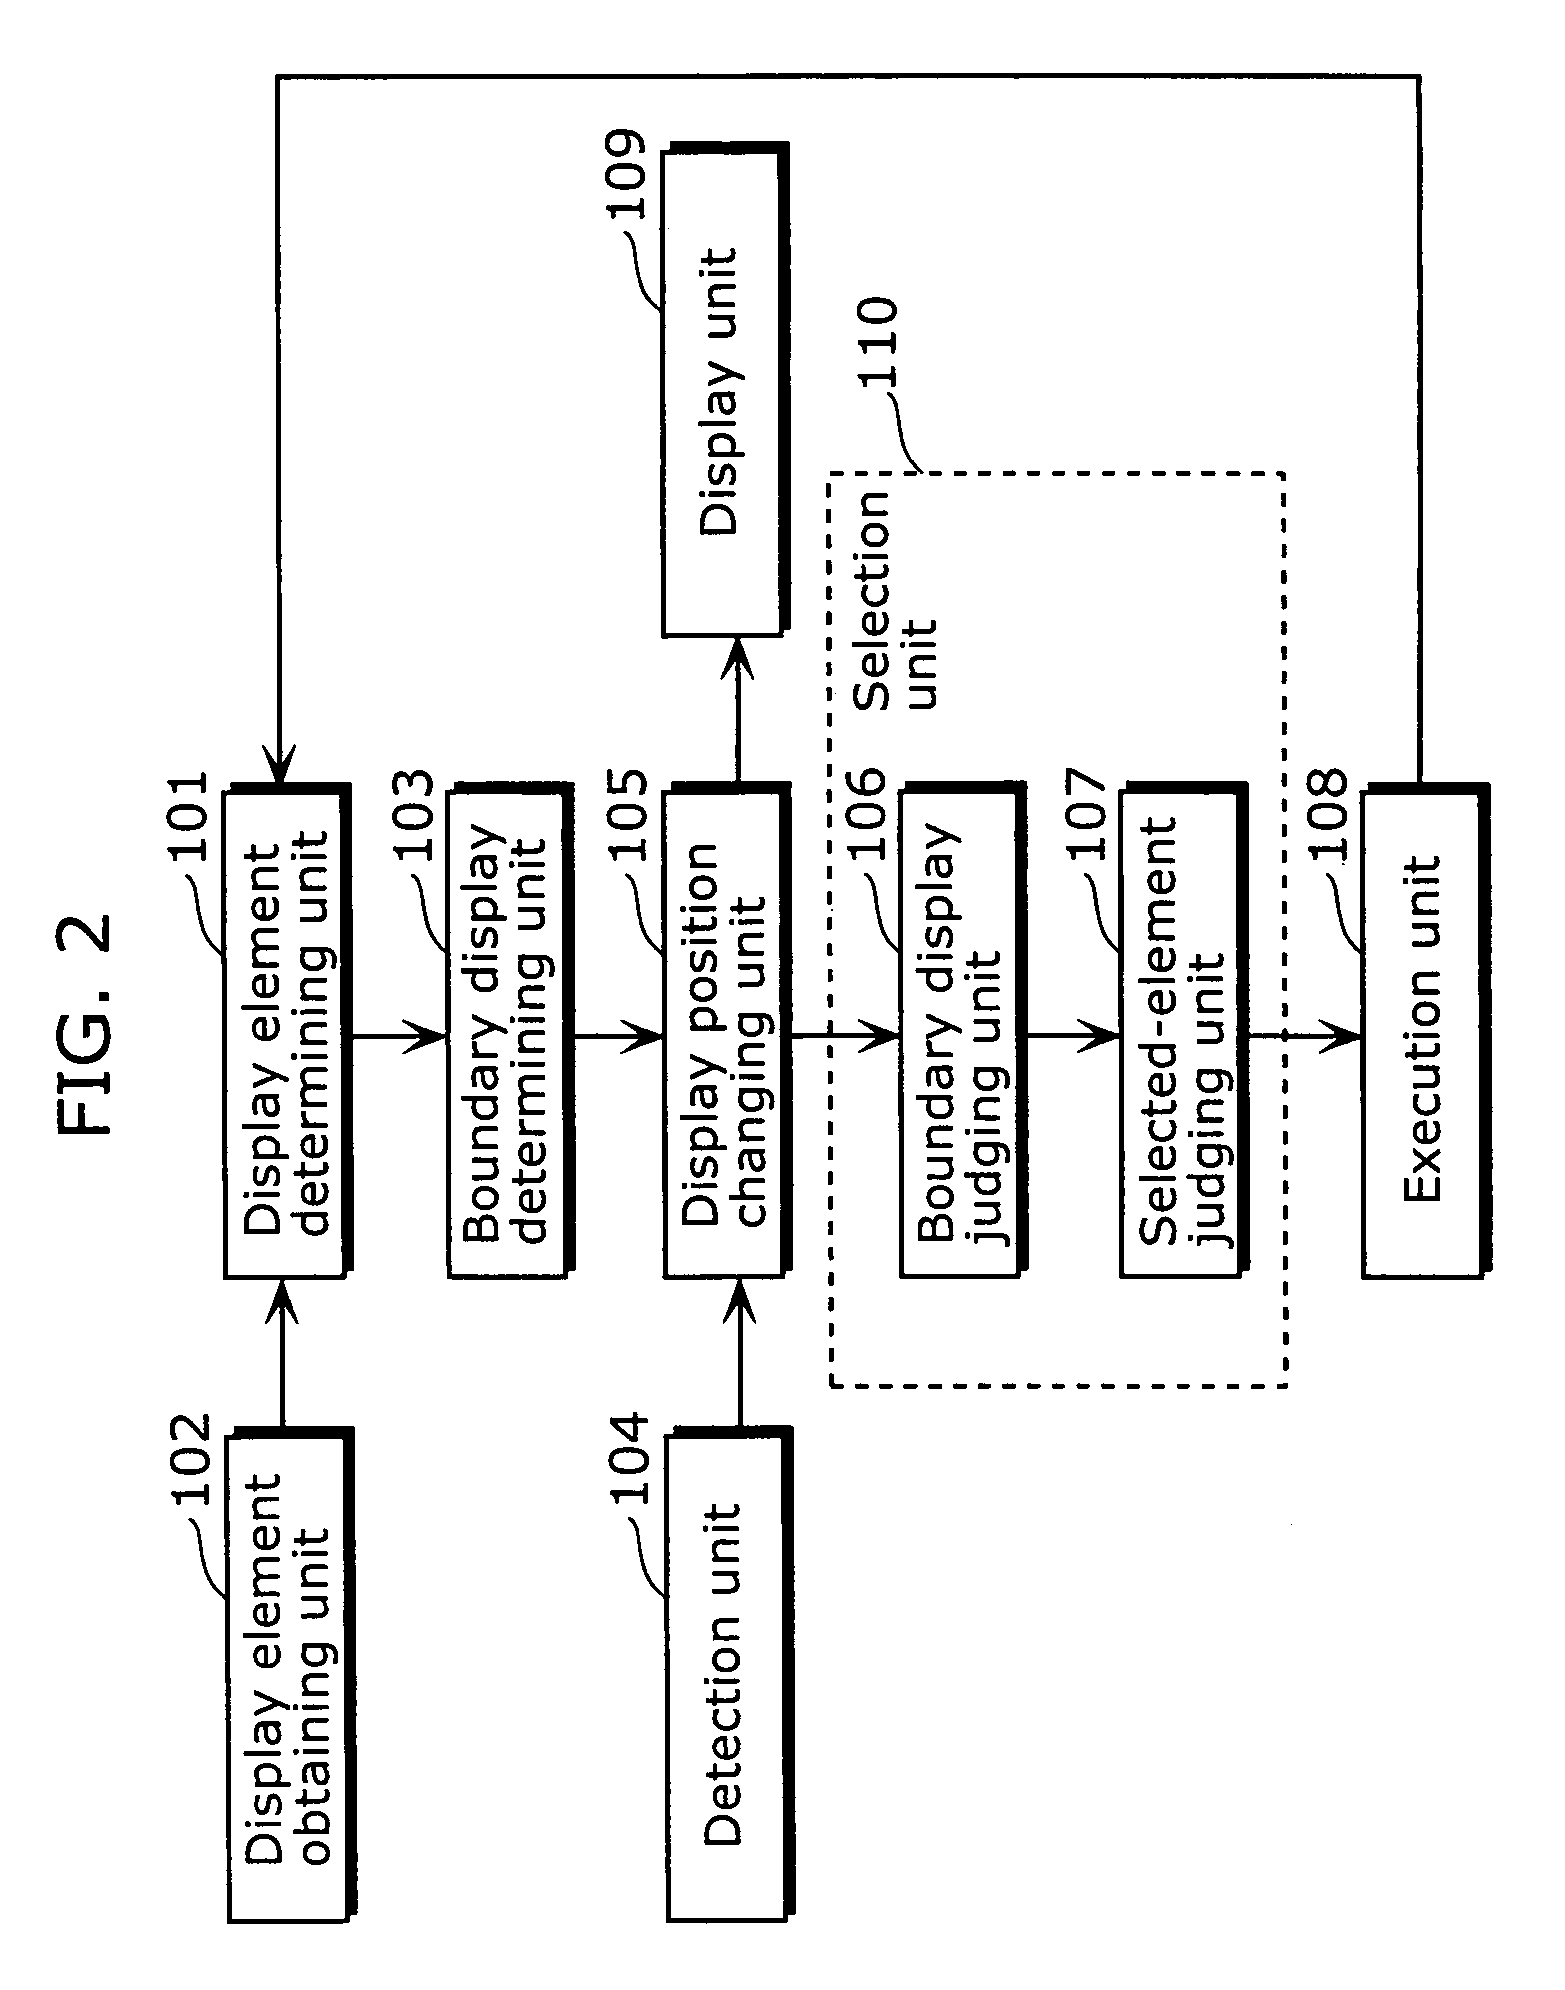 Display apparatus and method for hands free operation that selects a function when window is within field of view